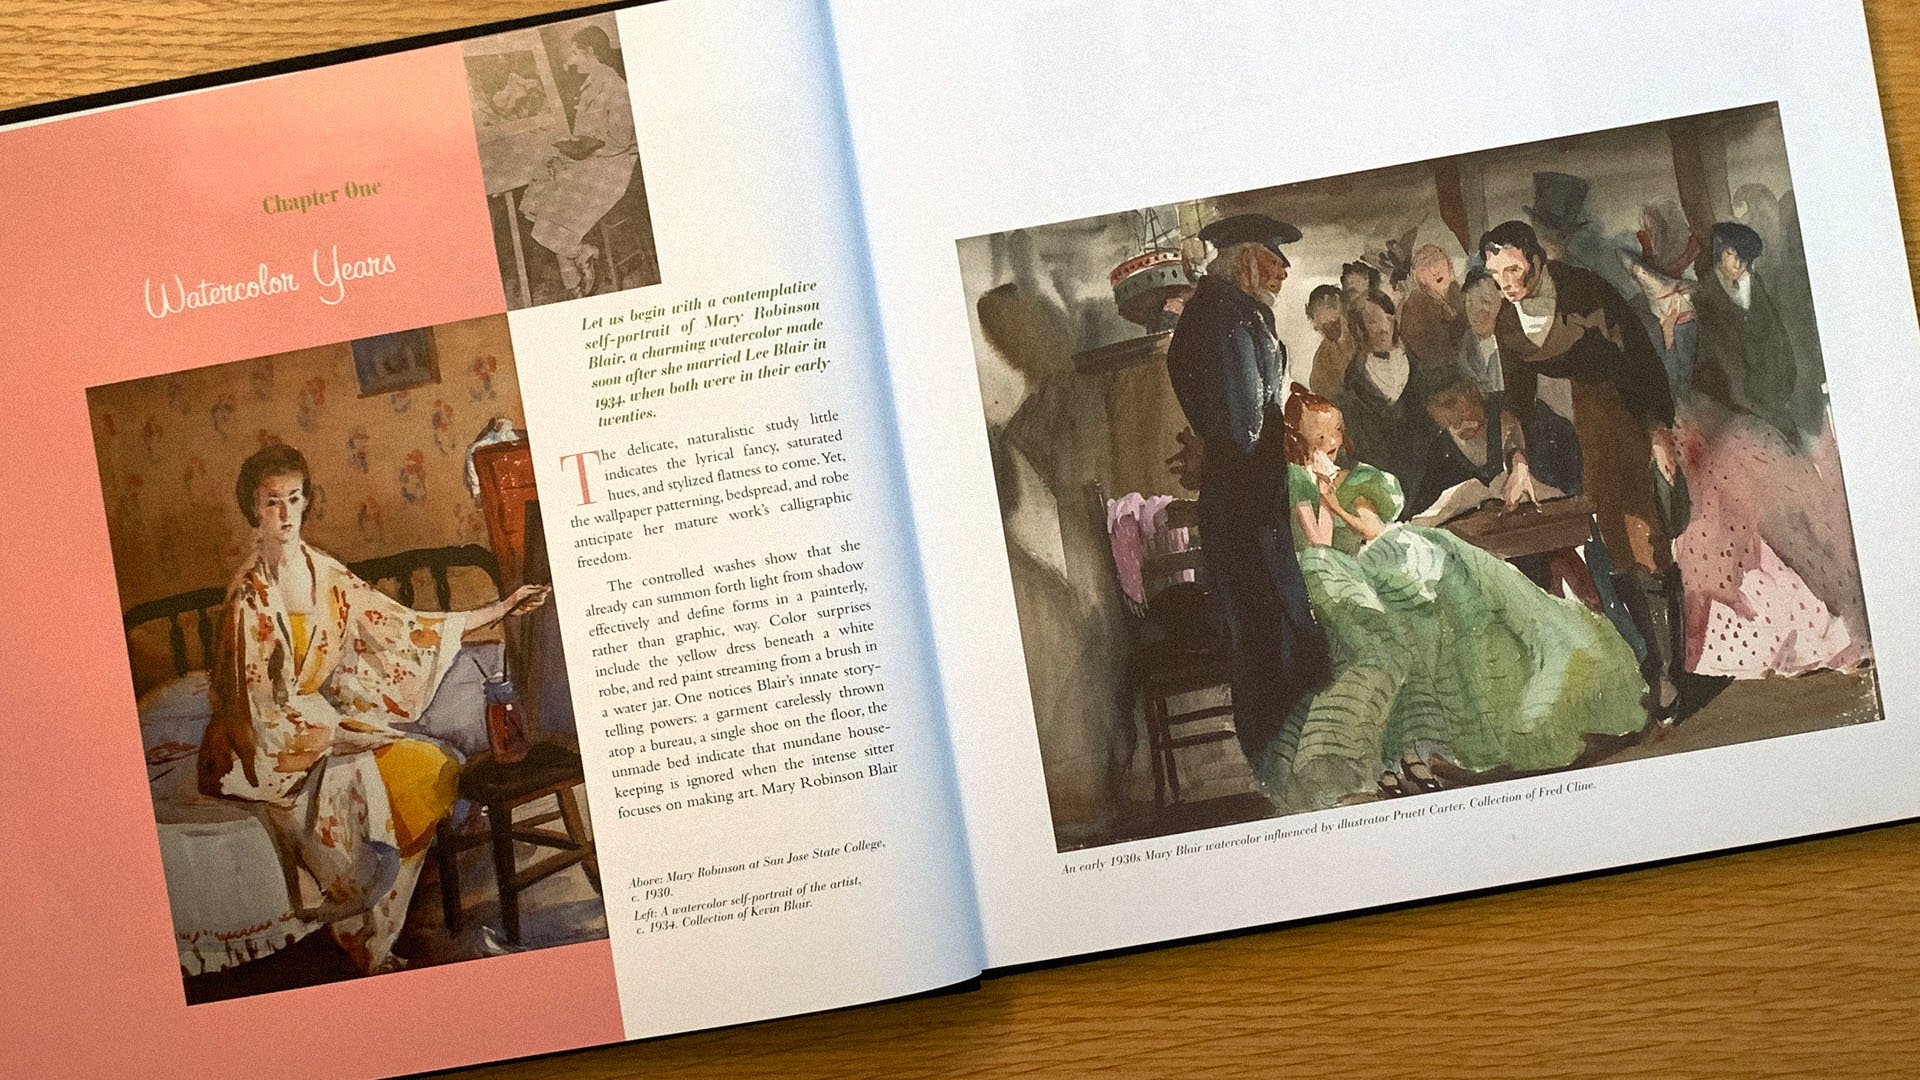 This double page spread from John Canemaker's book 'The Art And Flair Of Mary Blair' features a photo of young Mary Blair and two of her early watercolor paintings. One is a self-portrait of Mary working at her easel, the other an illustration inspired by Pruett Carter of a girl in a bright green dress seated at a table and faced with a crowd.